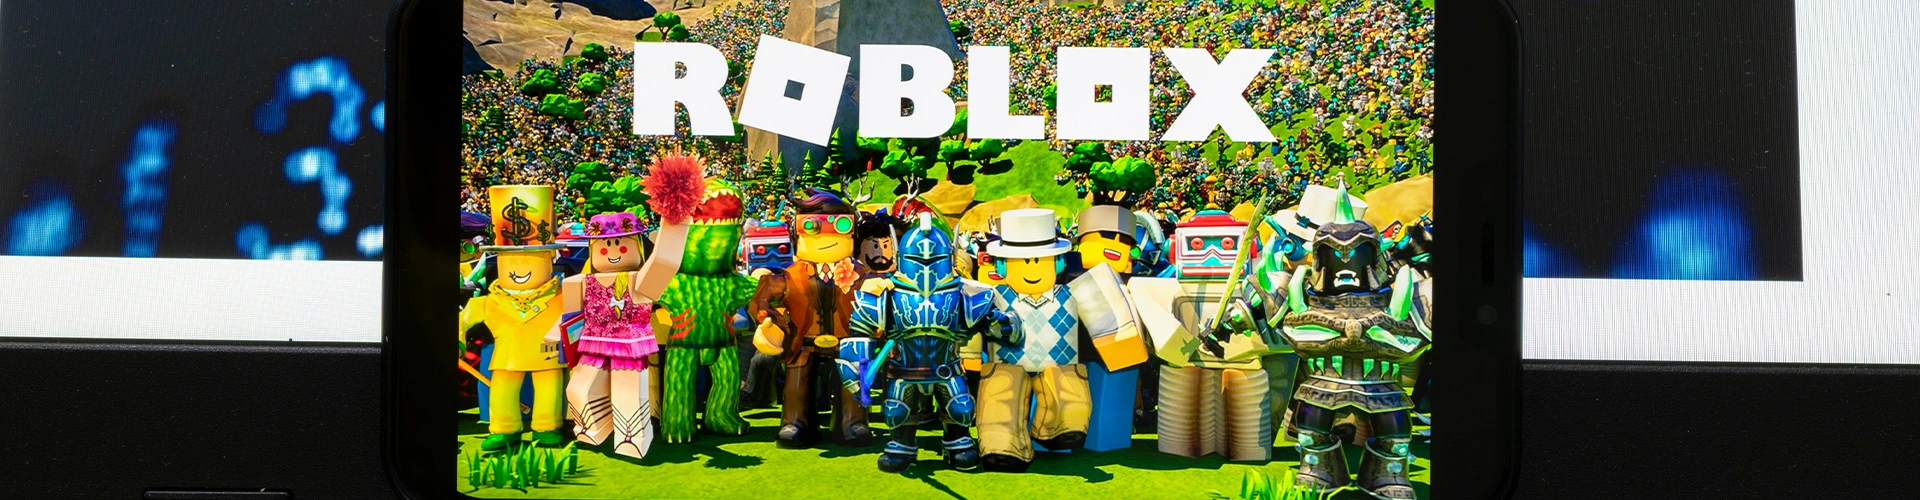 How To Look Cool On Roblox For Free No Robux Needed  YouTube